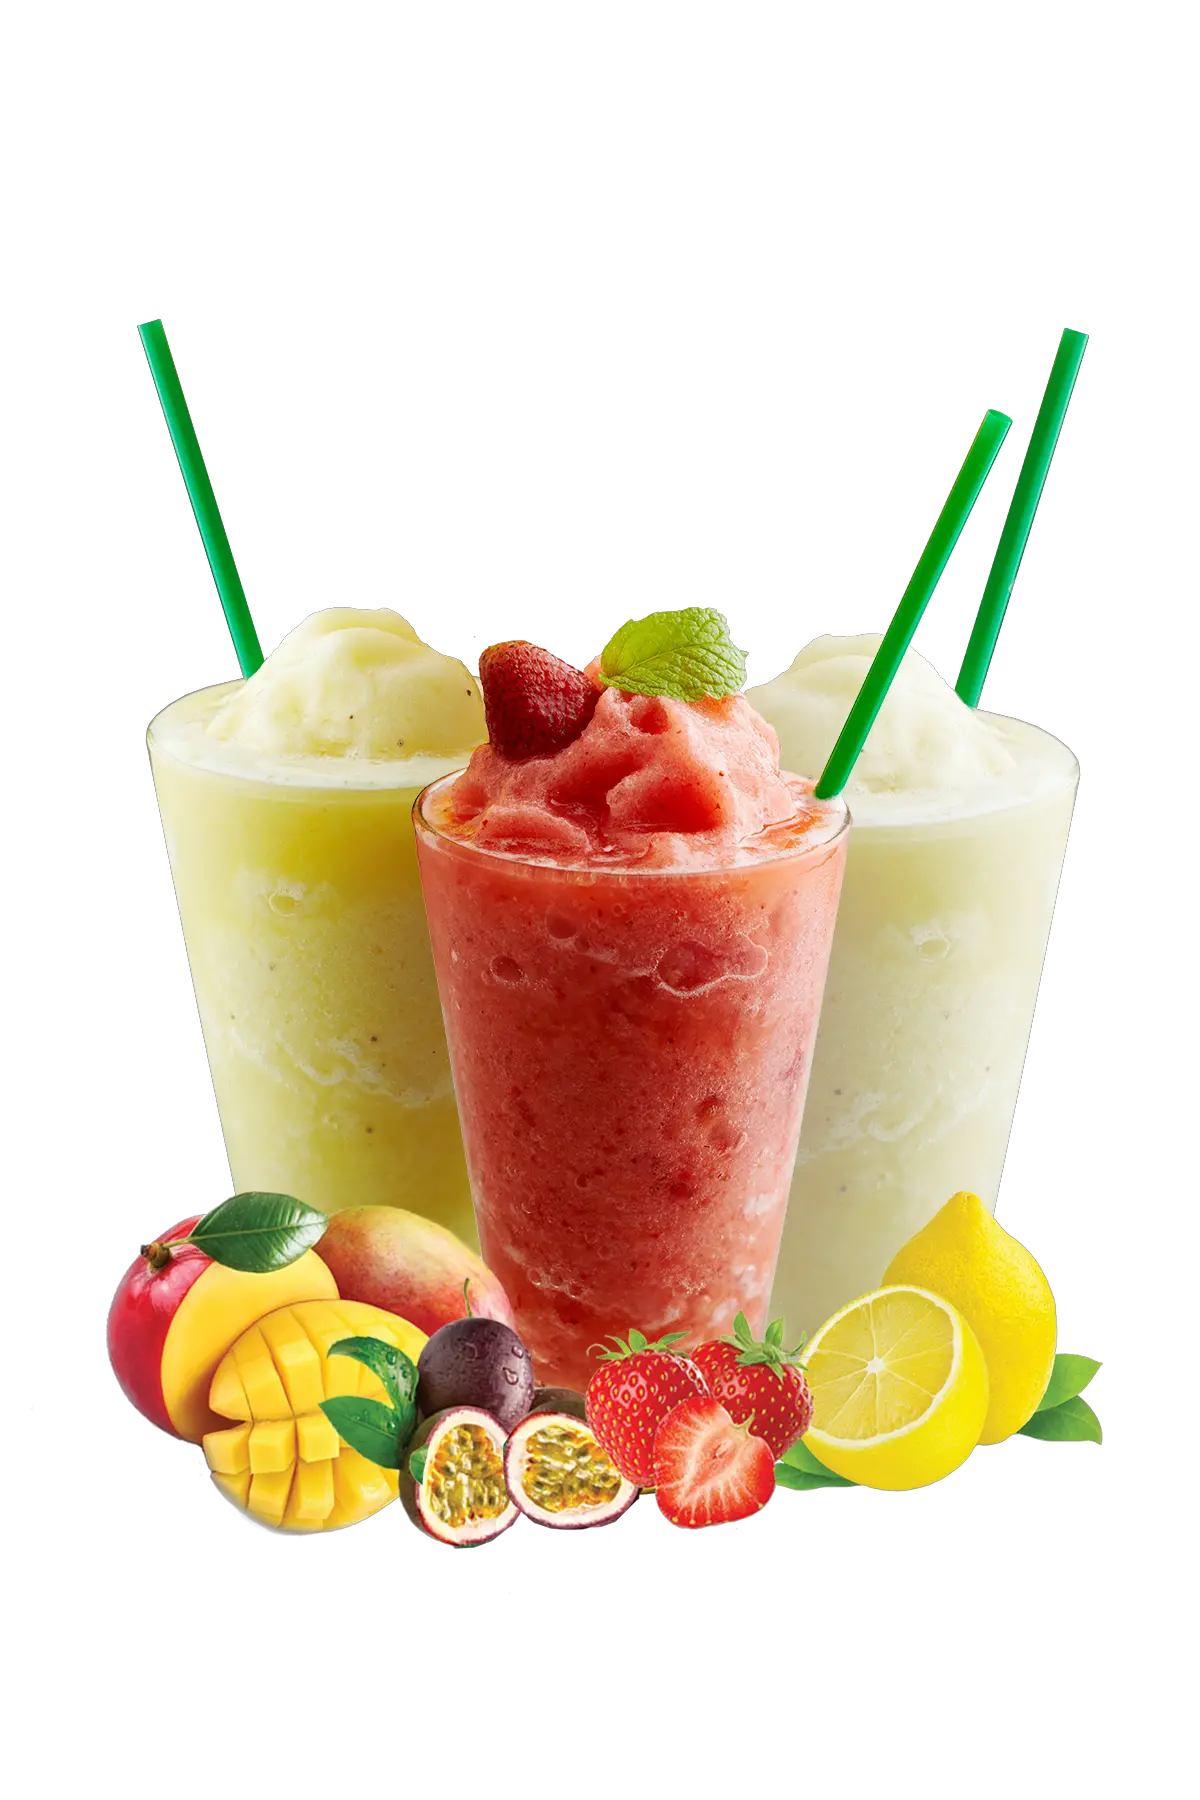 Transparent Png Image Smoothie Png Smoothies Png